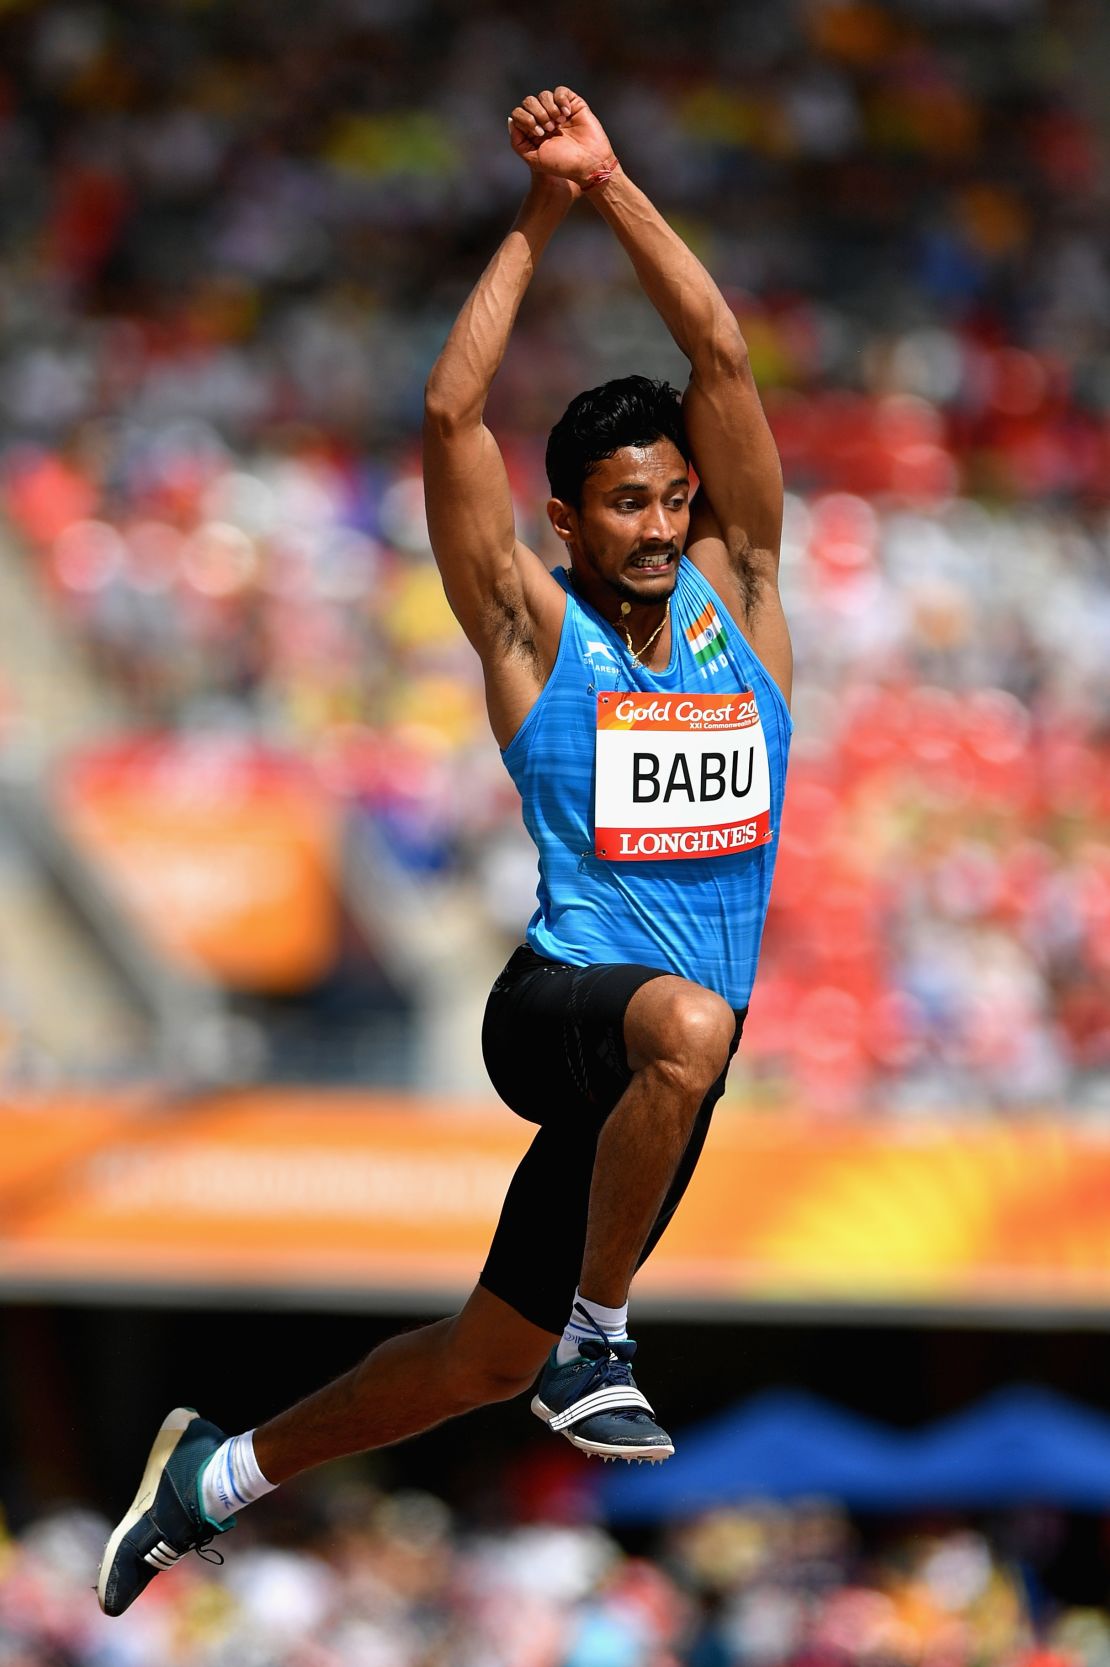 Rakesh Babu was also thrown out of the Games. He was due to compete in Saturday's triple jump final. 